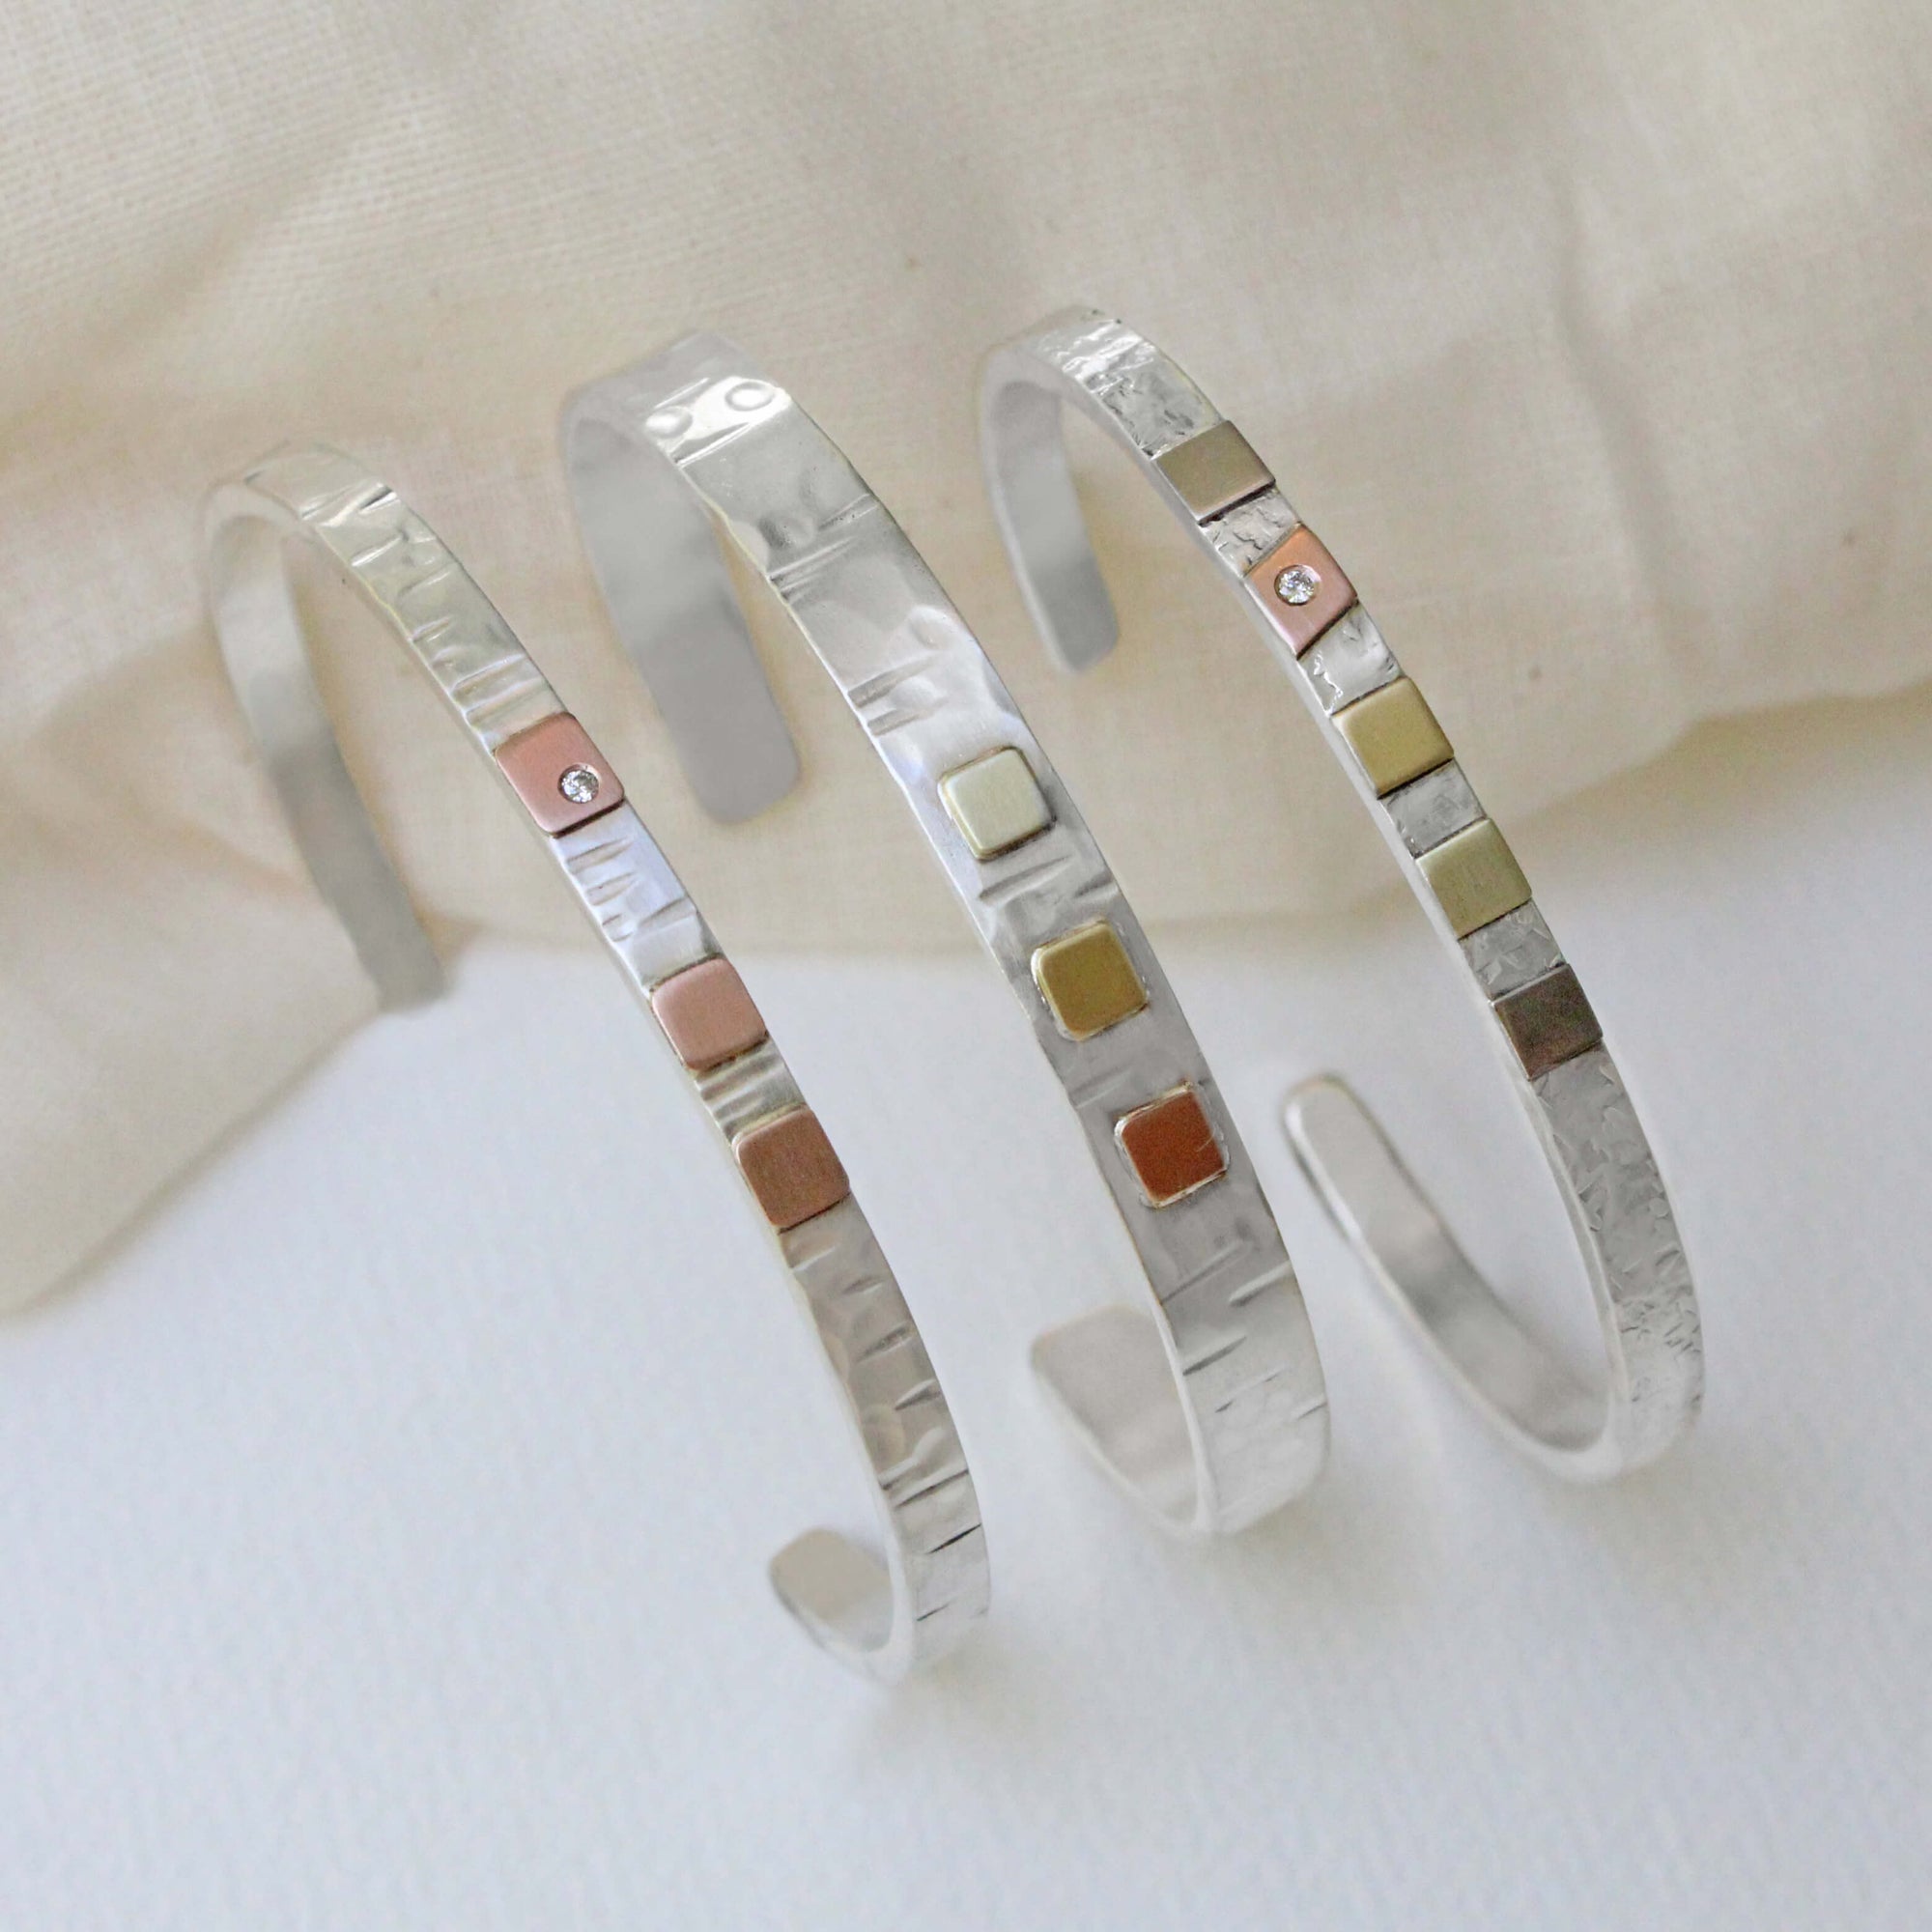 Signature sterling silver and gold cuff bracelets from EC Design Jewelry in Minneapolis, MN.